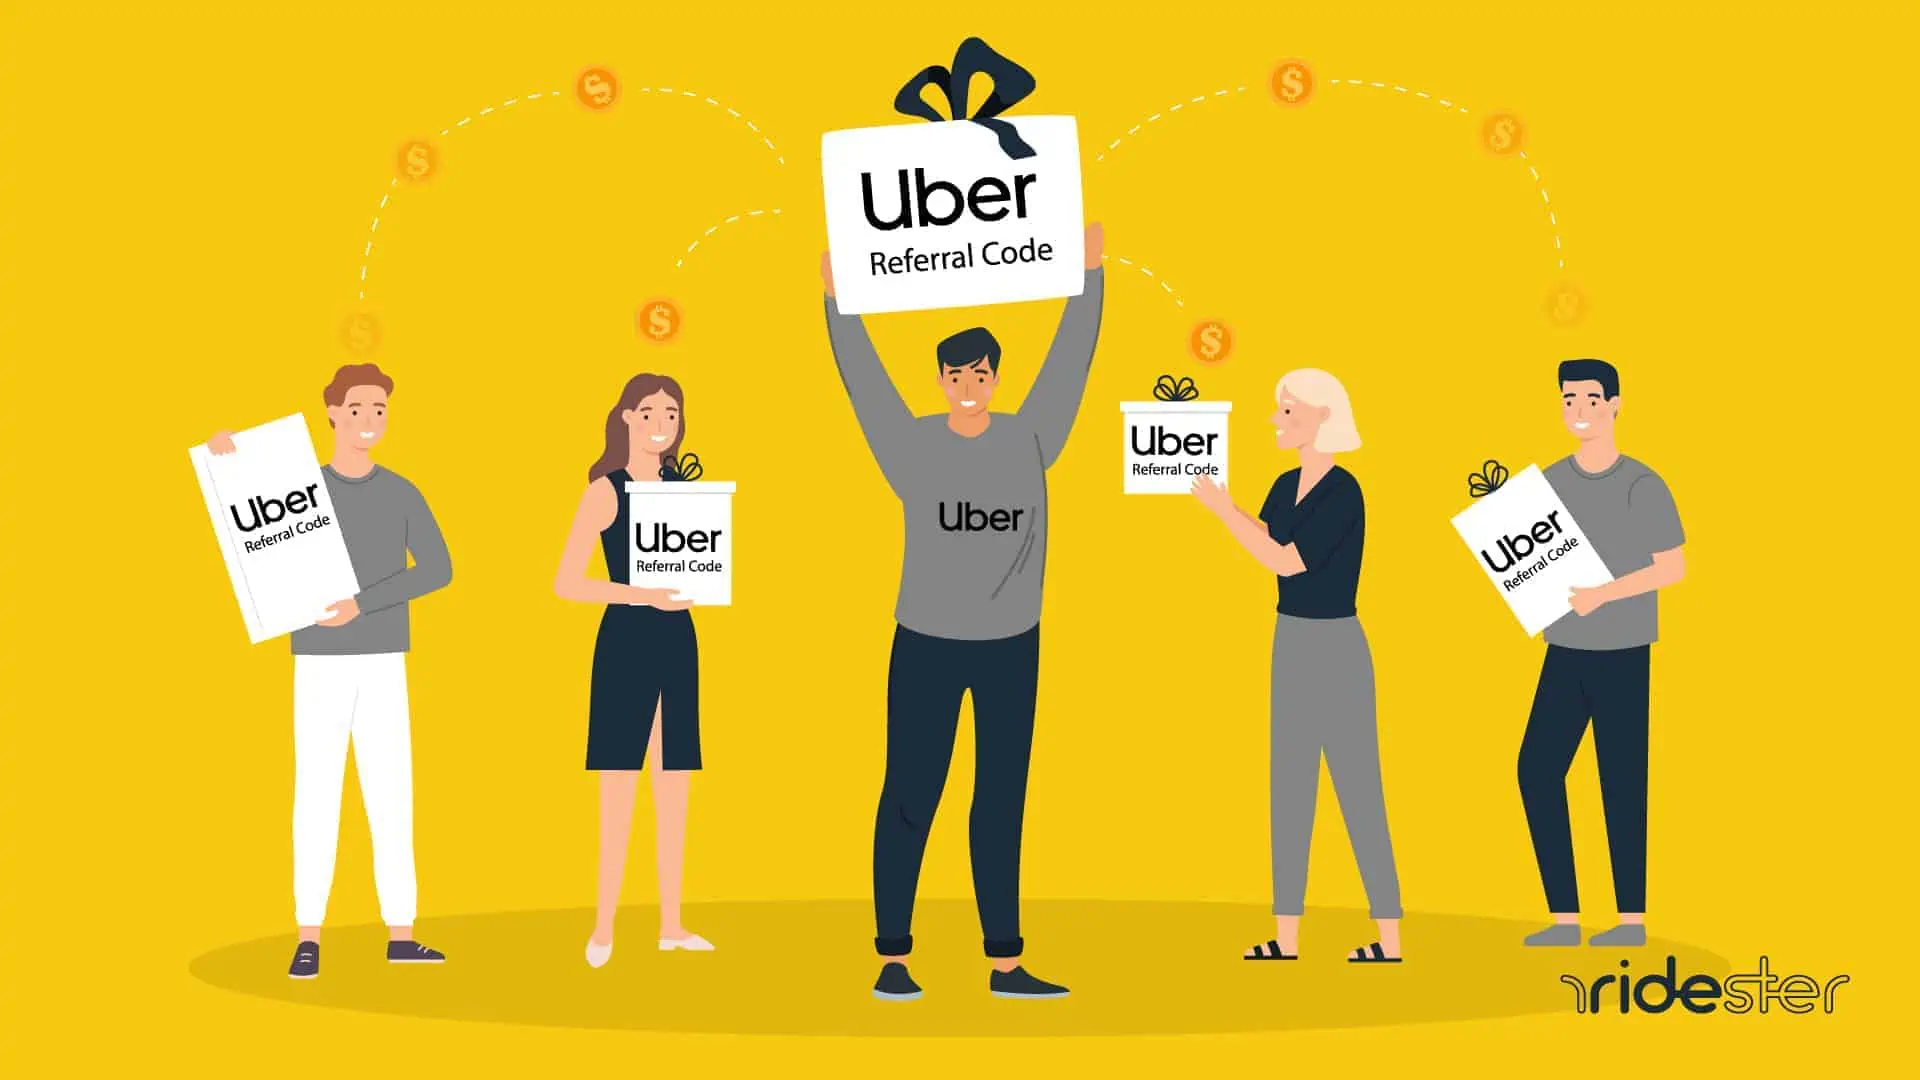 vector graphic showing people standing in a circle and holding uber referrals in their arms in the form of gift boxes